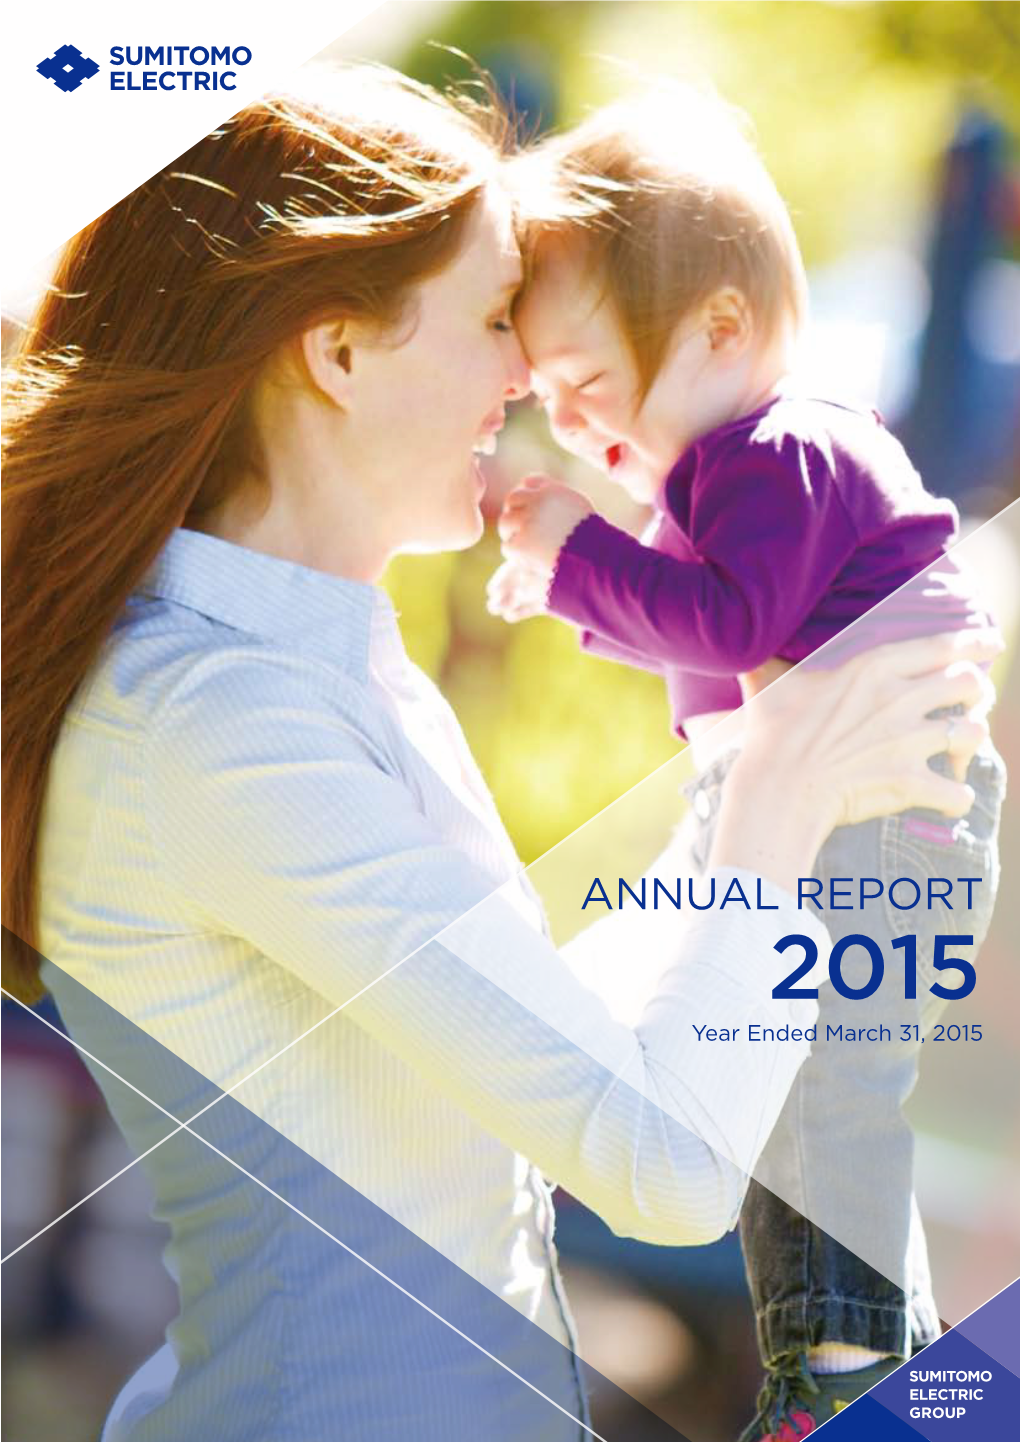 ANNUAL REPORT 2015 Year Ended March 31, 2015